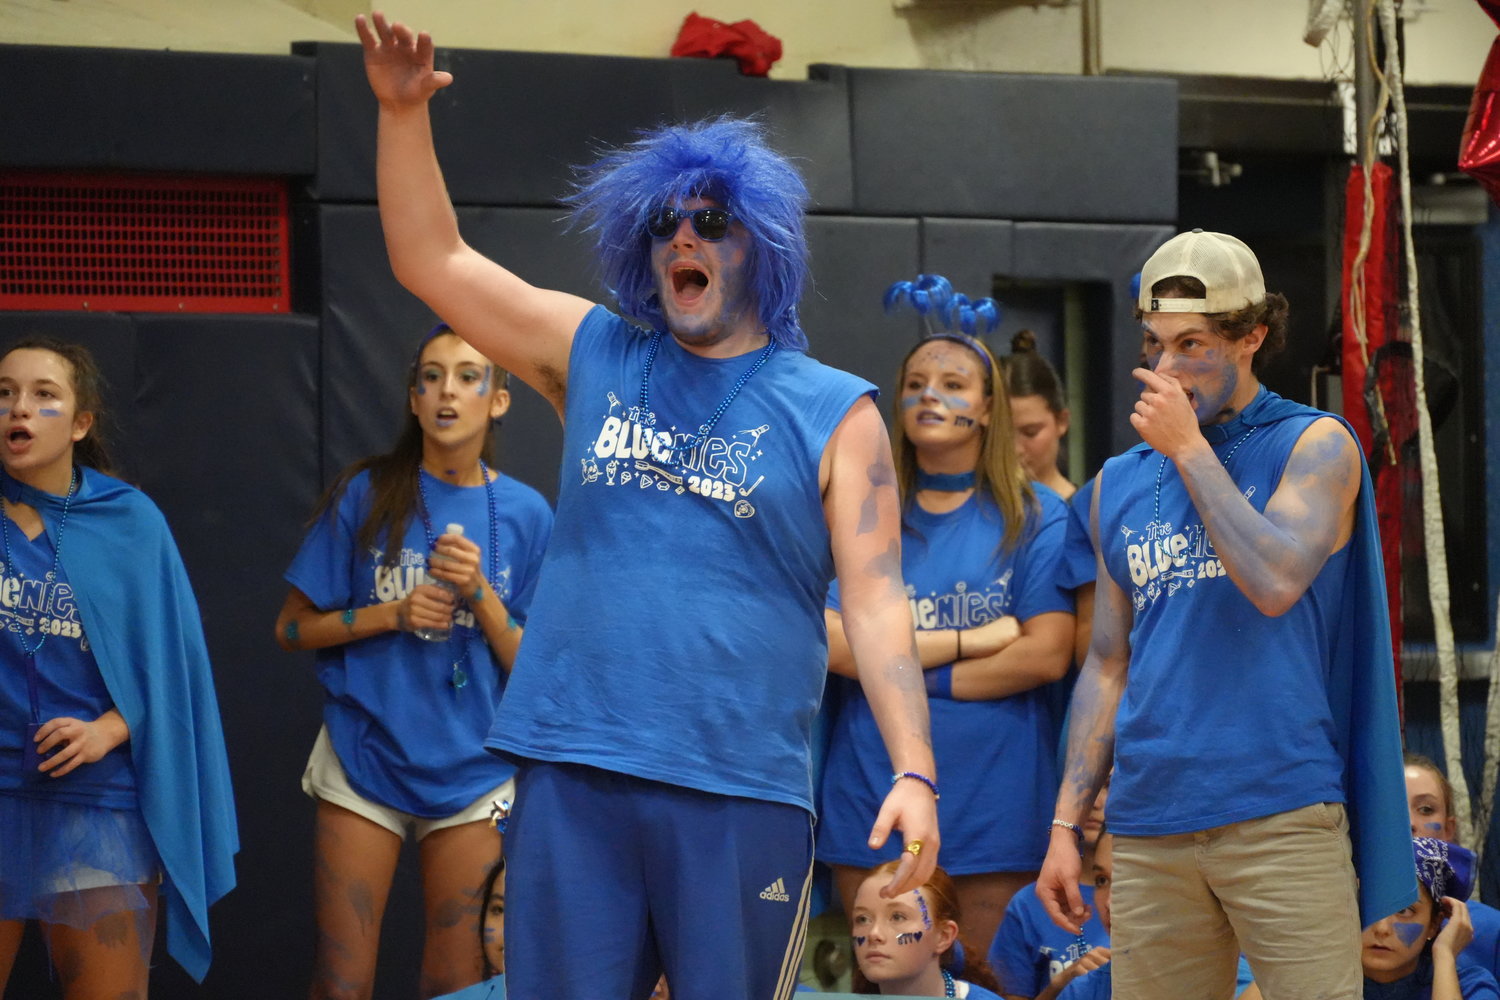 Sean Sandhaas, a South Side High School senior, gets into the spirit of the annual Red and Blue competition.